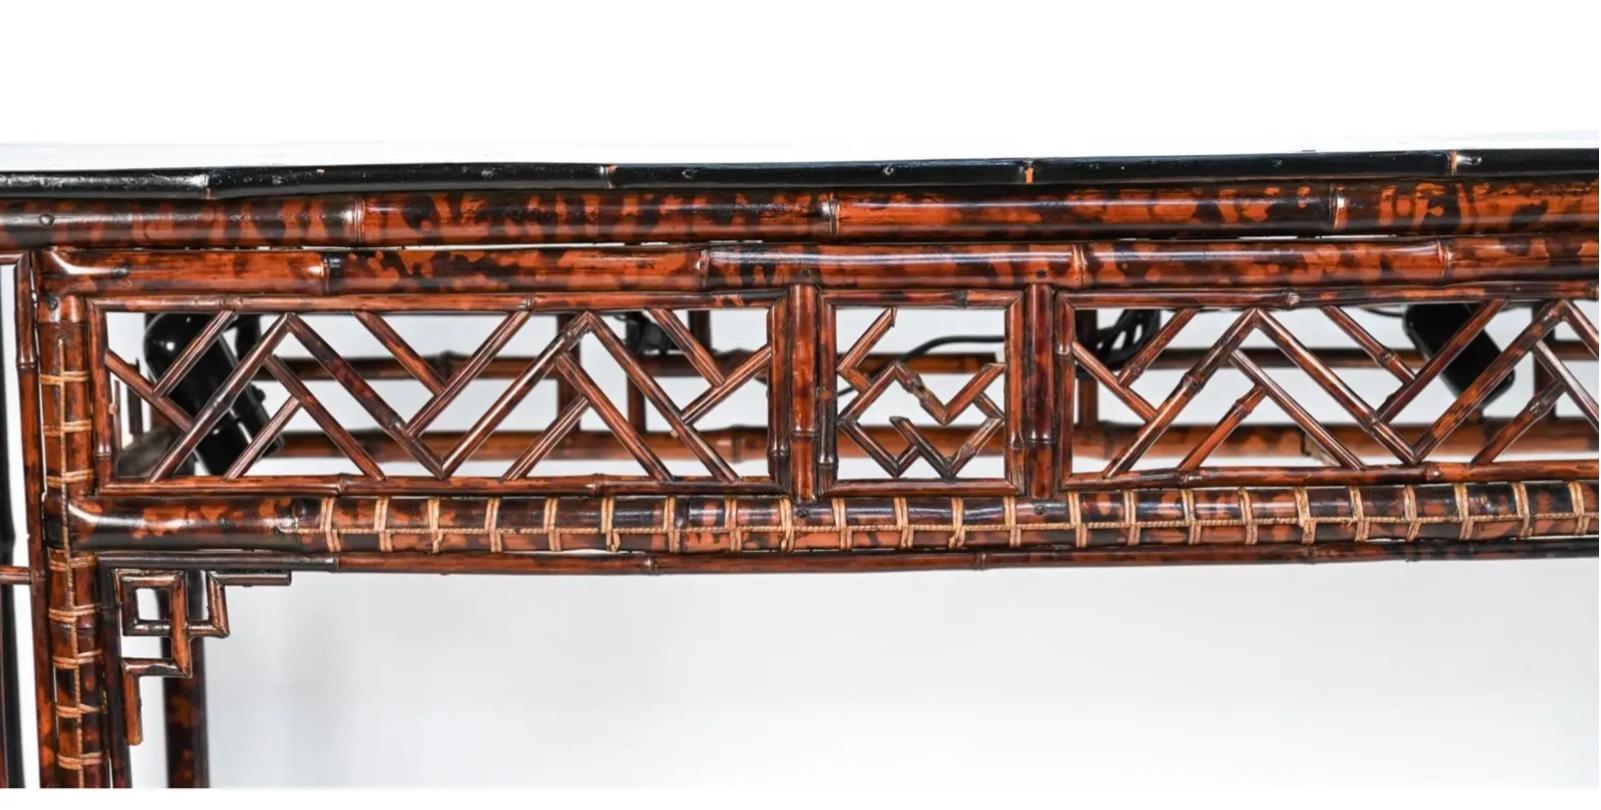 Chinese Chippendale style console with a black lacquer top over a tortoise shell decorated bamboo frame having Chippendale designs. A wonderful and rare striking piece of functional furniture.